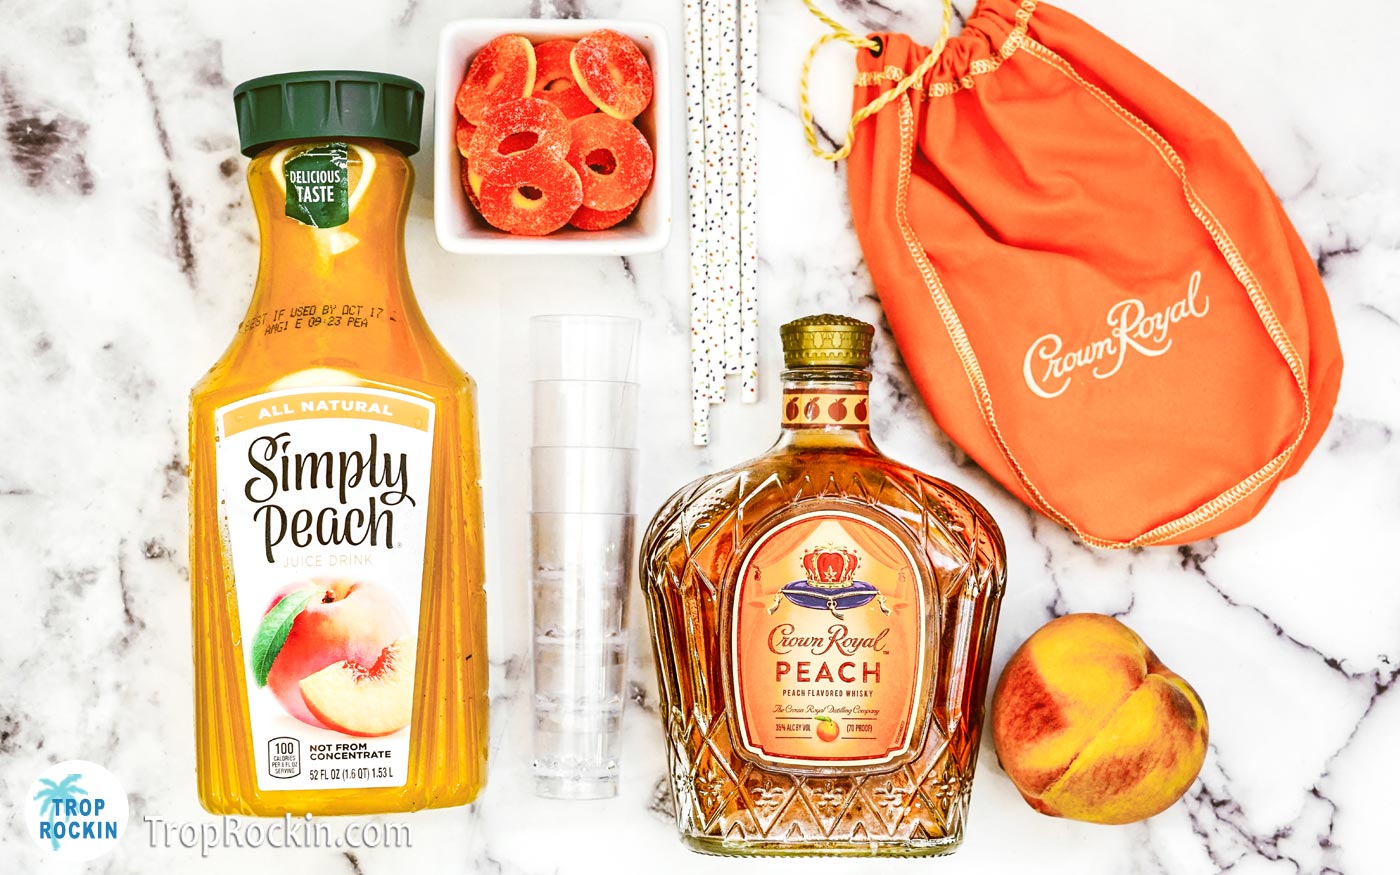 Crown Royal Peach Shots ingredients flatlay with shot glasses and paper straws.